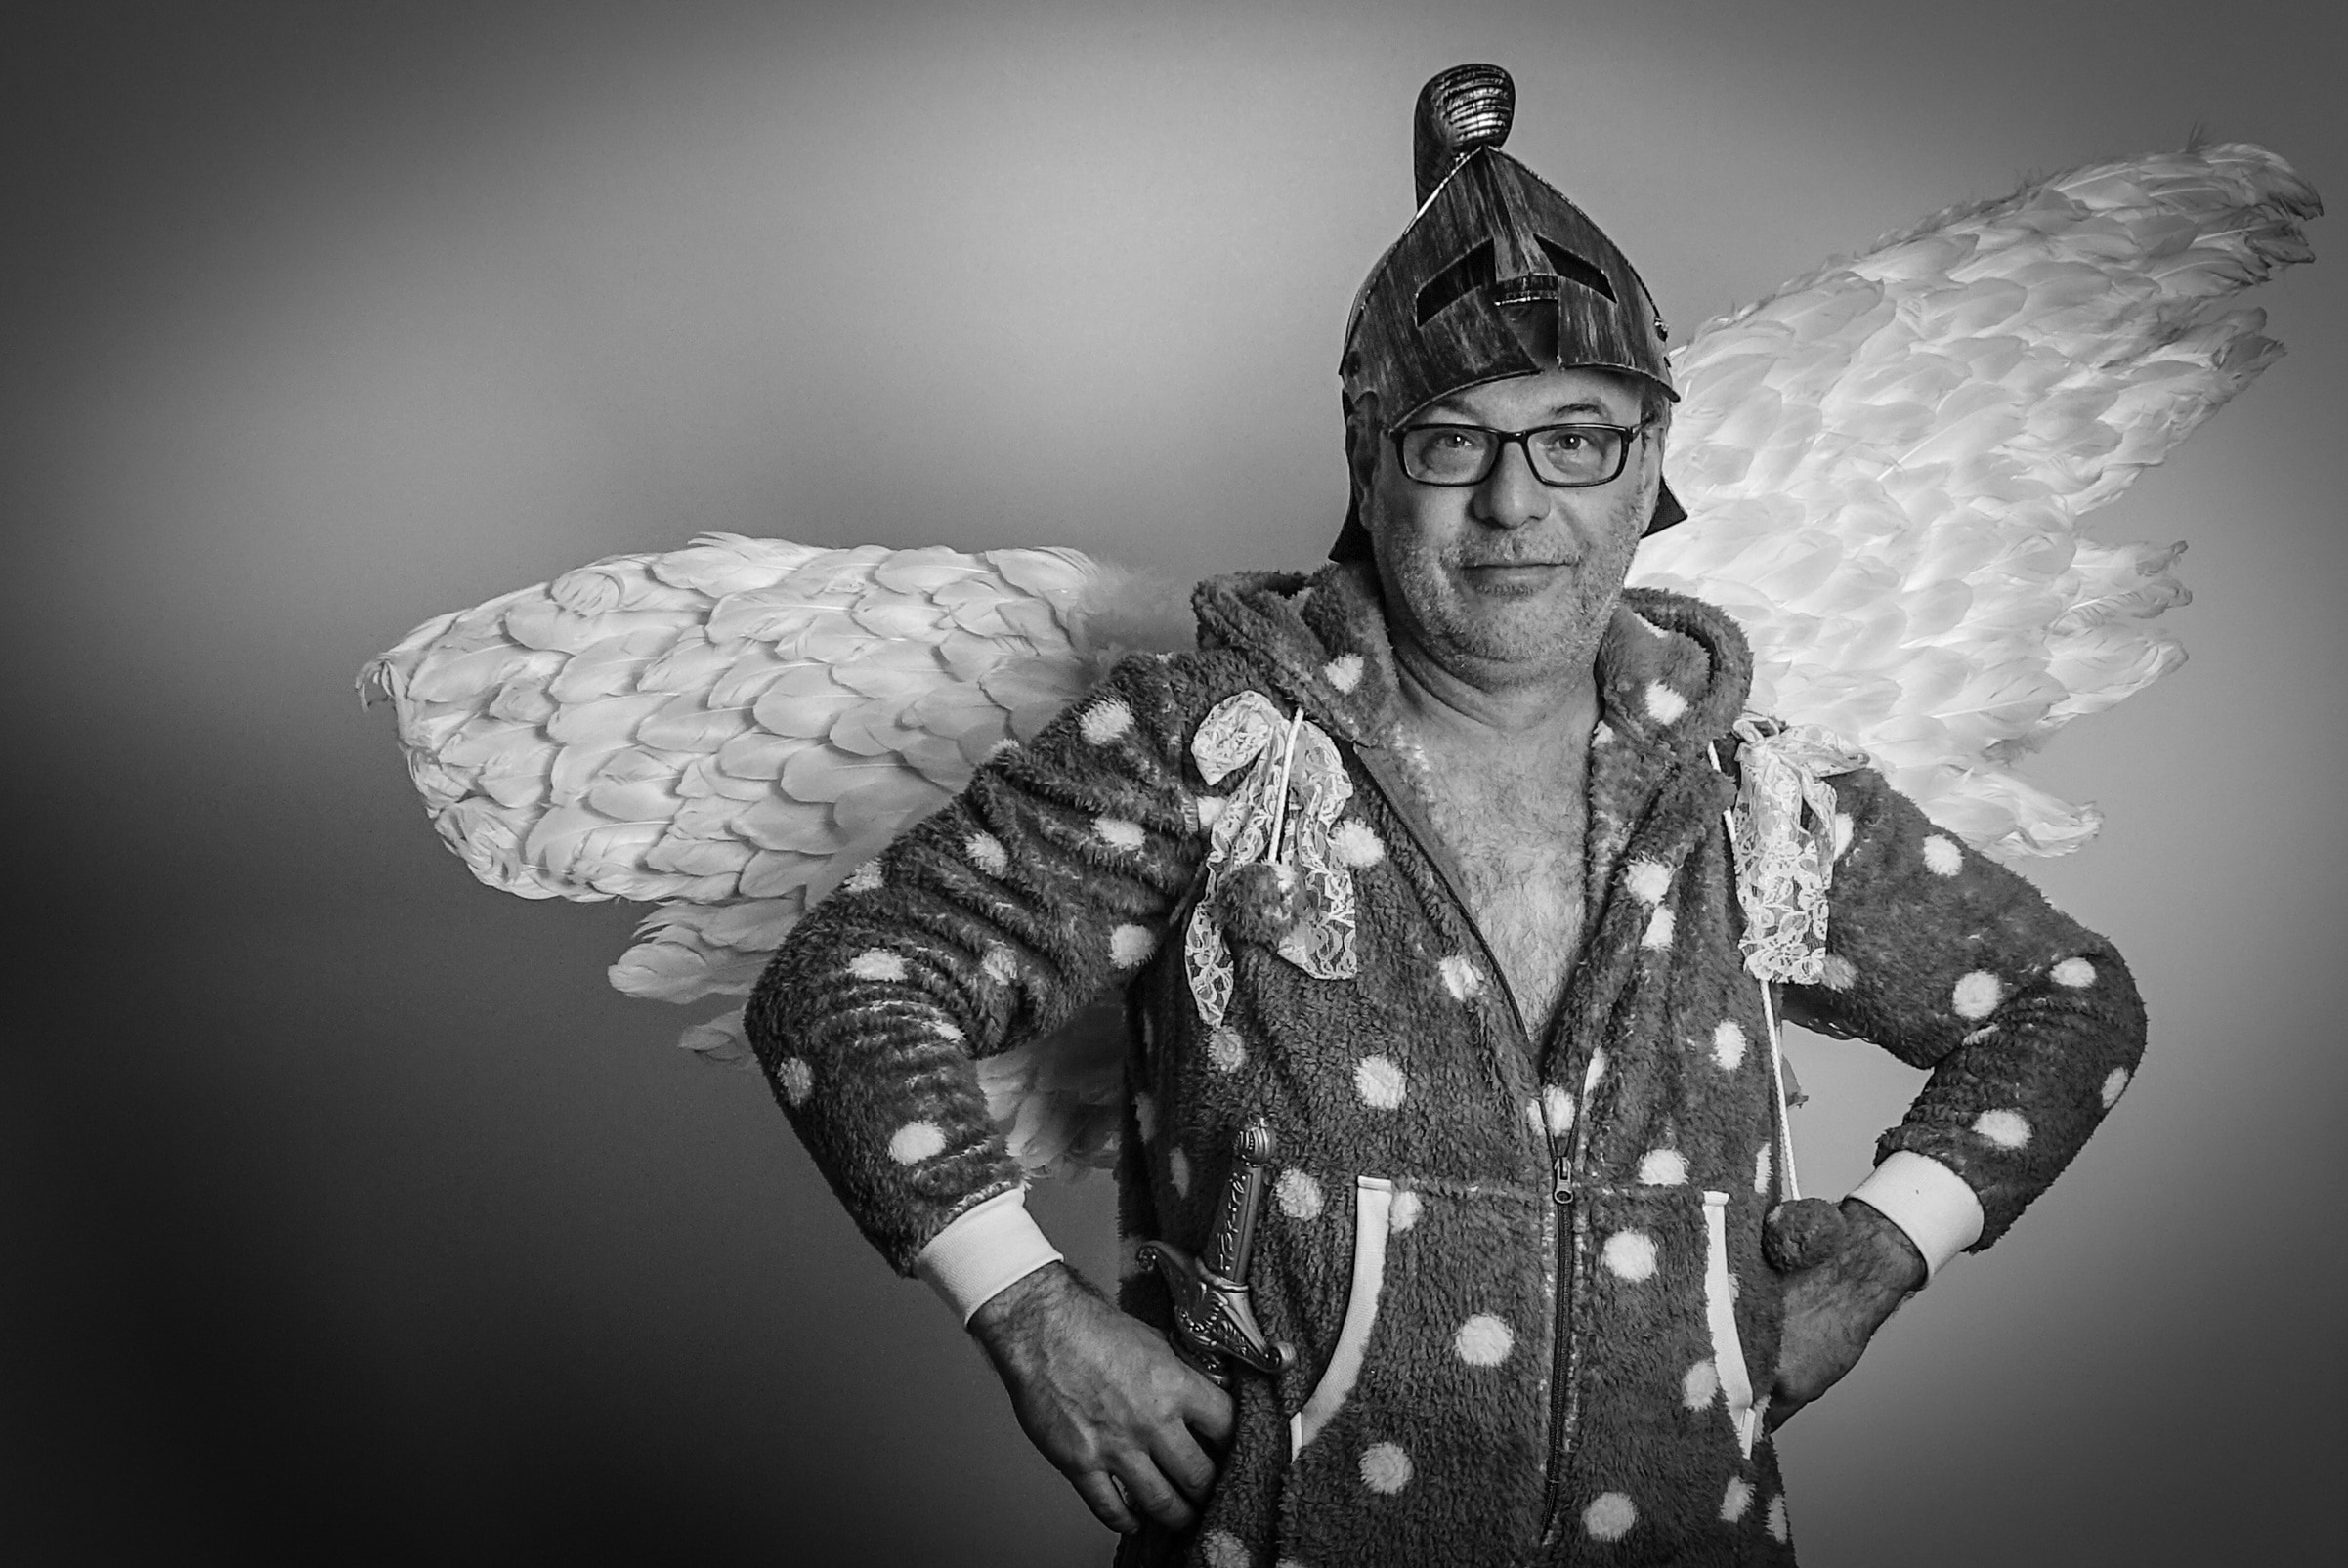 man wearing zip up jacket with wings costume